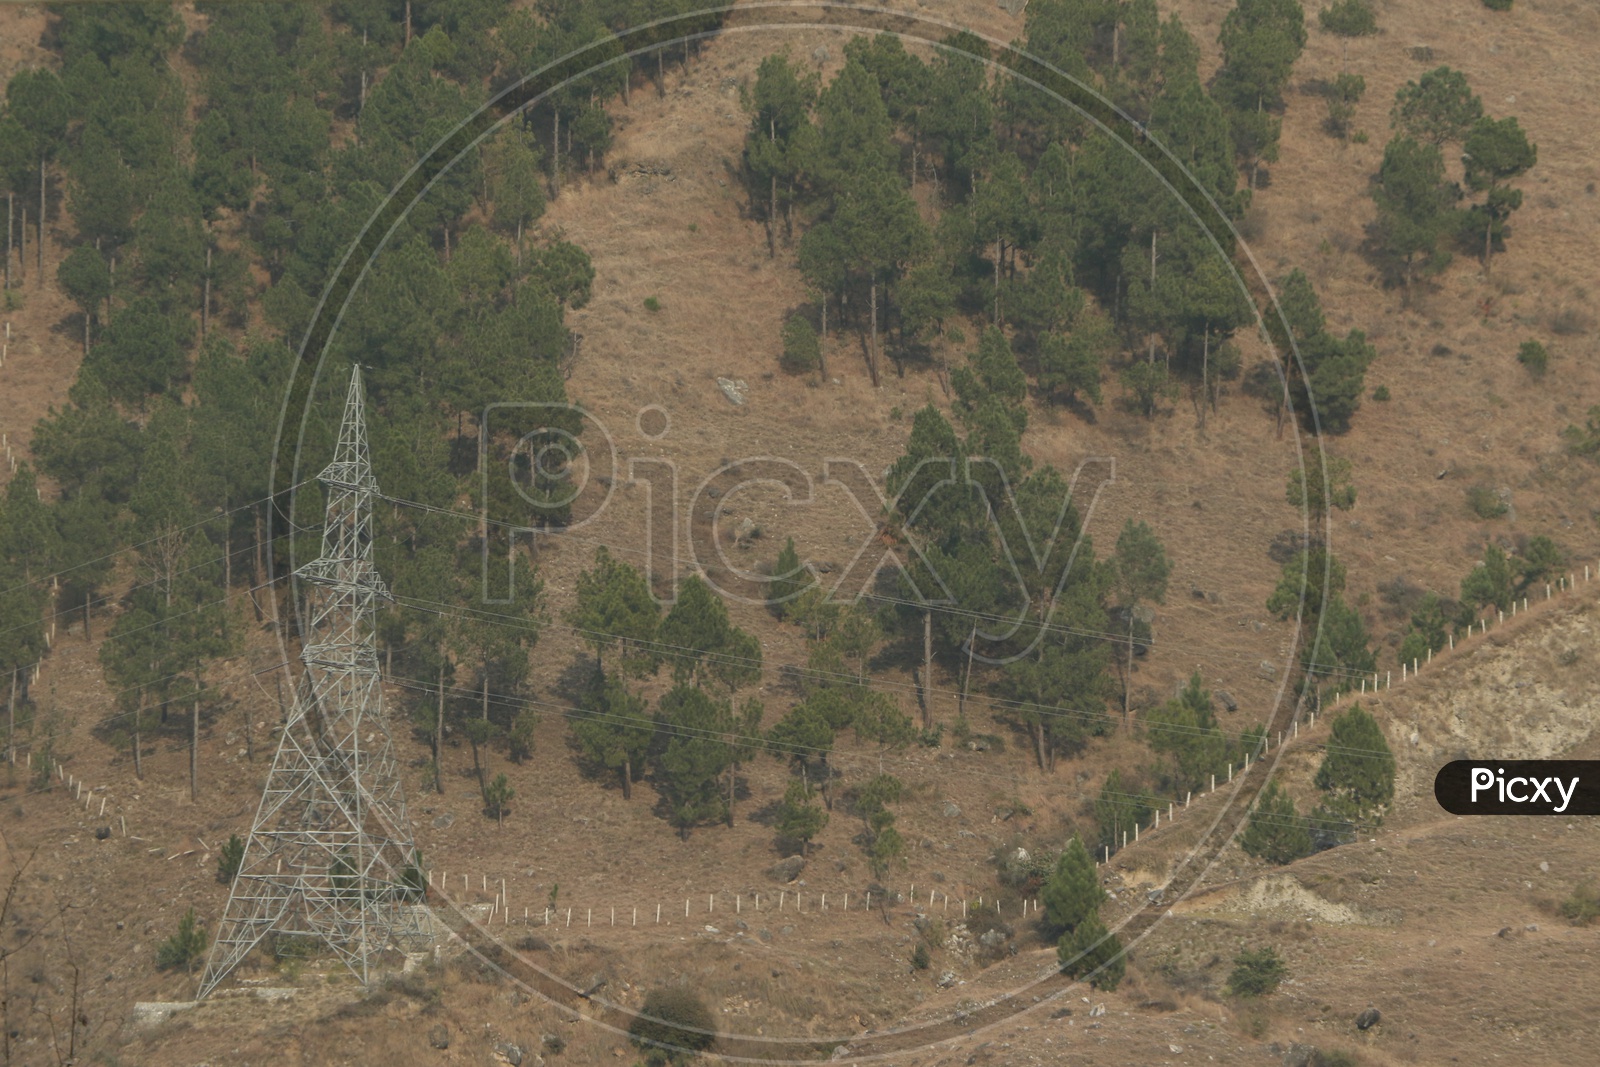 Electrical Transmission lines in the hills